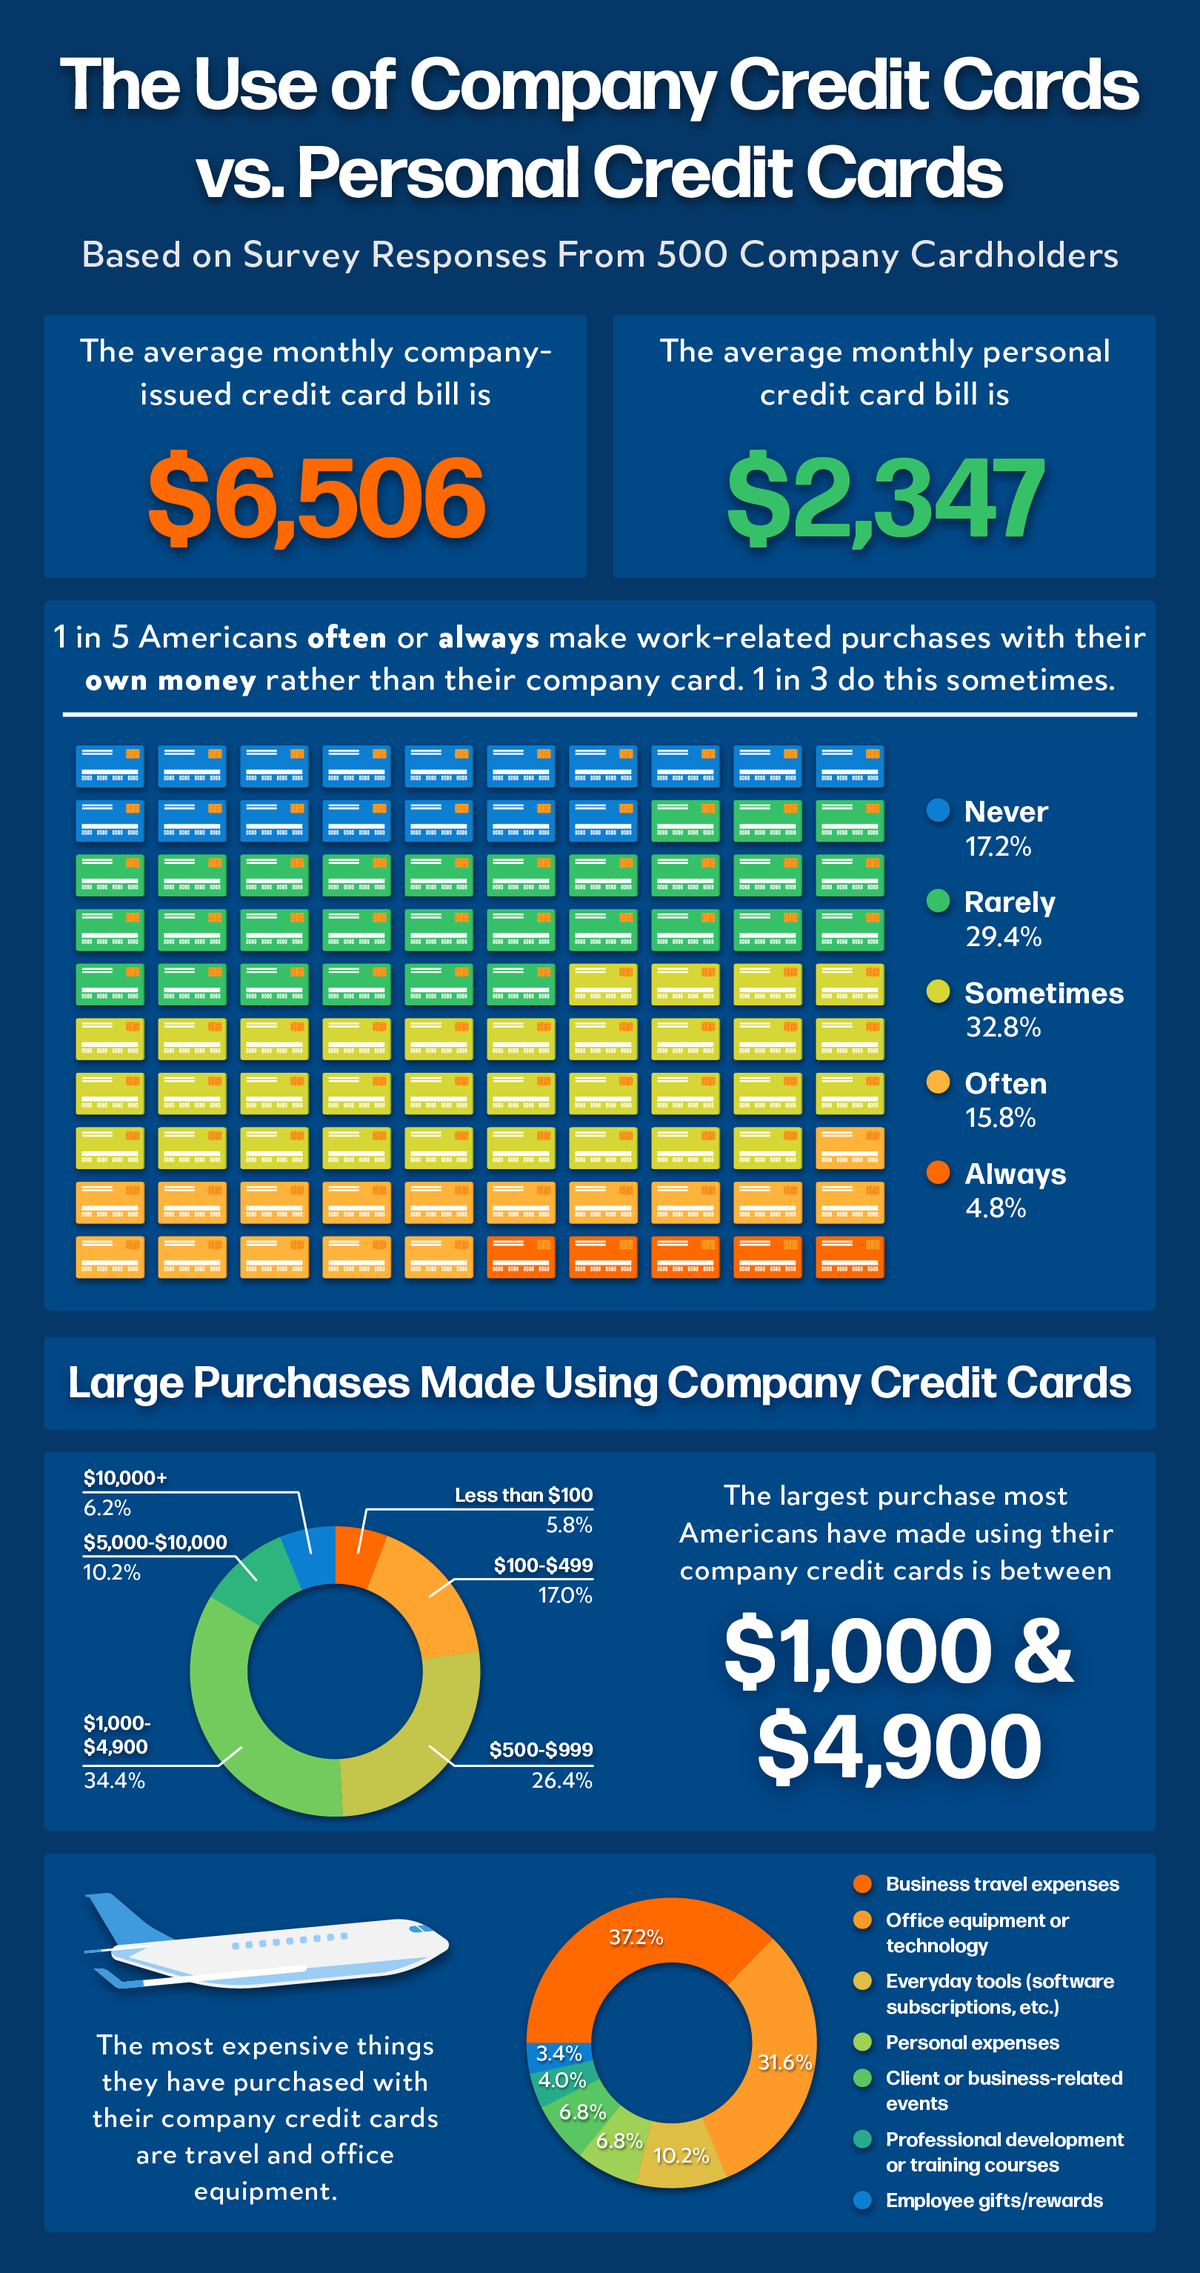 An infographic illustrating insights about the use of company credit cards vs. personal credit cards